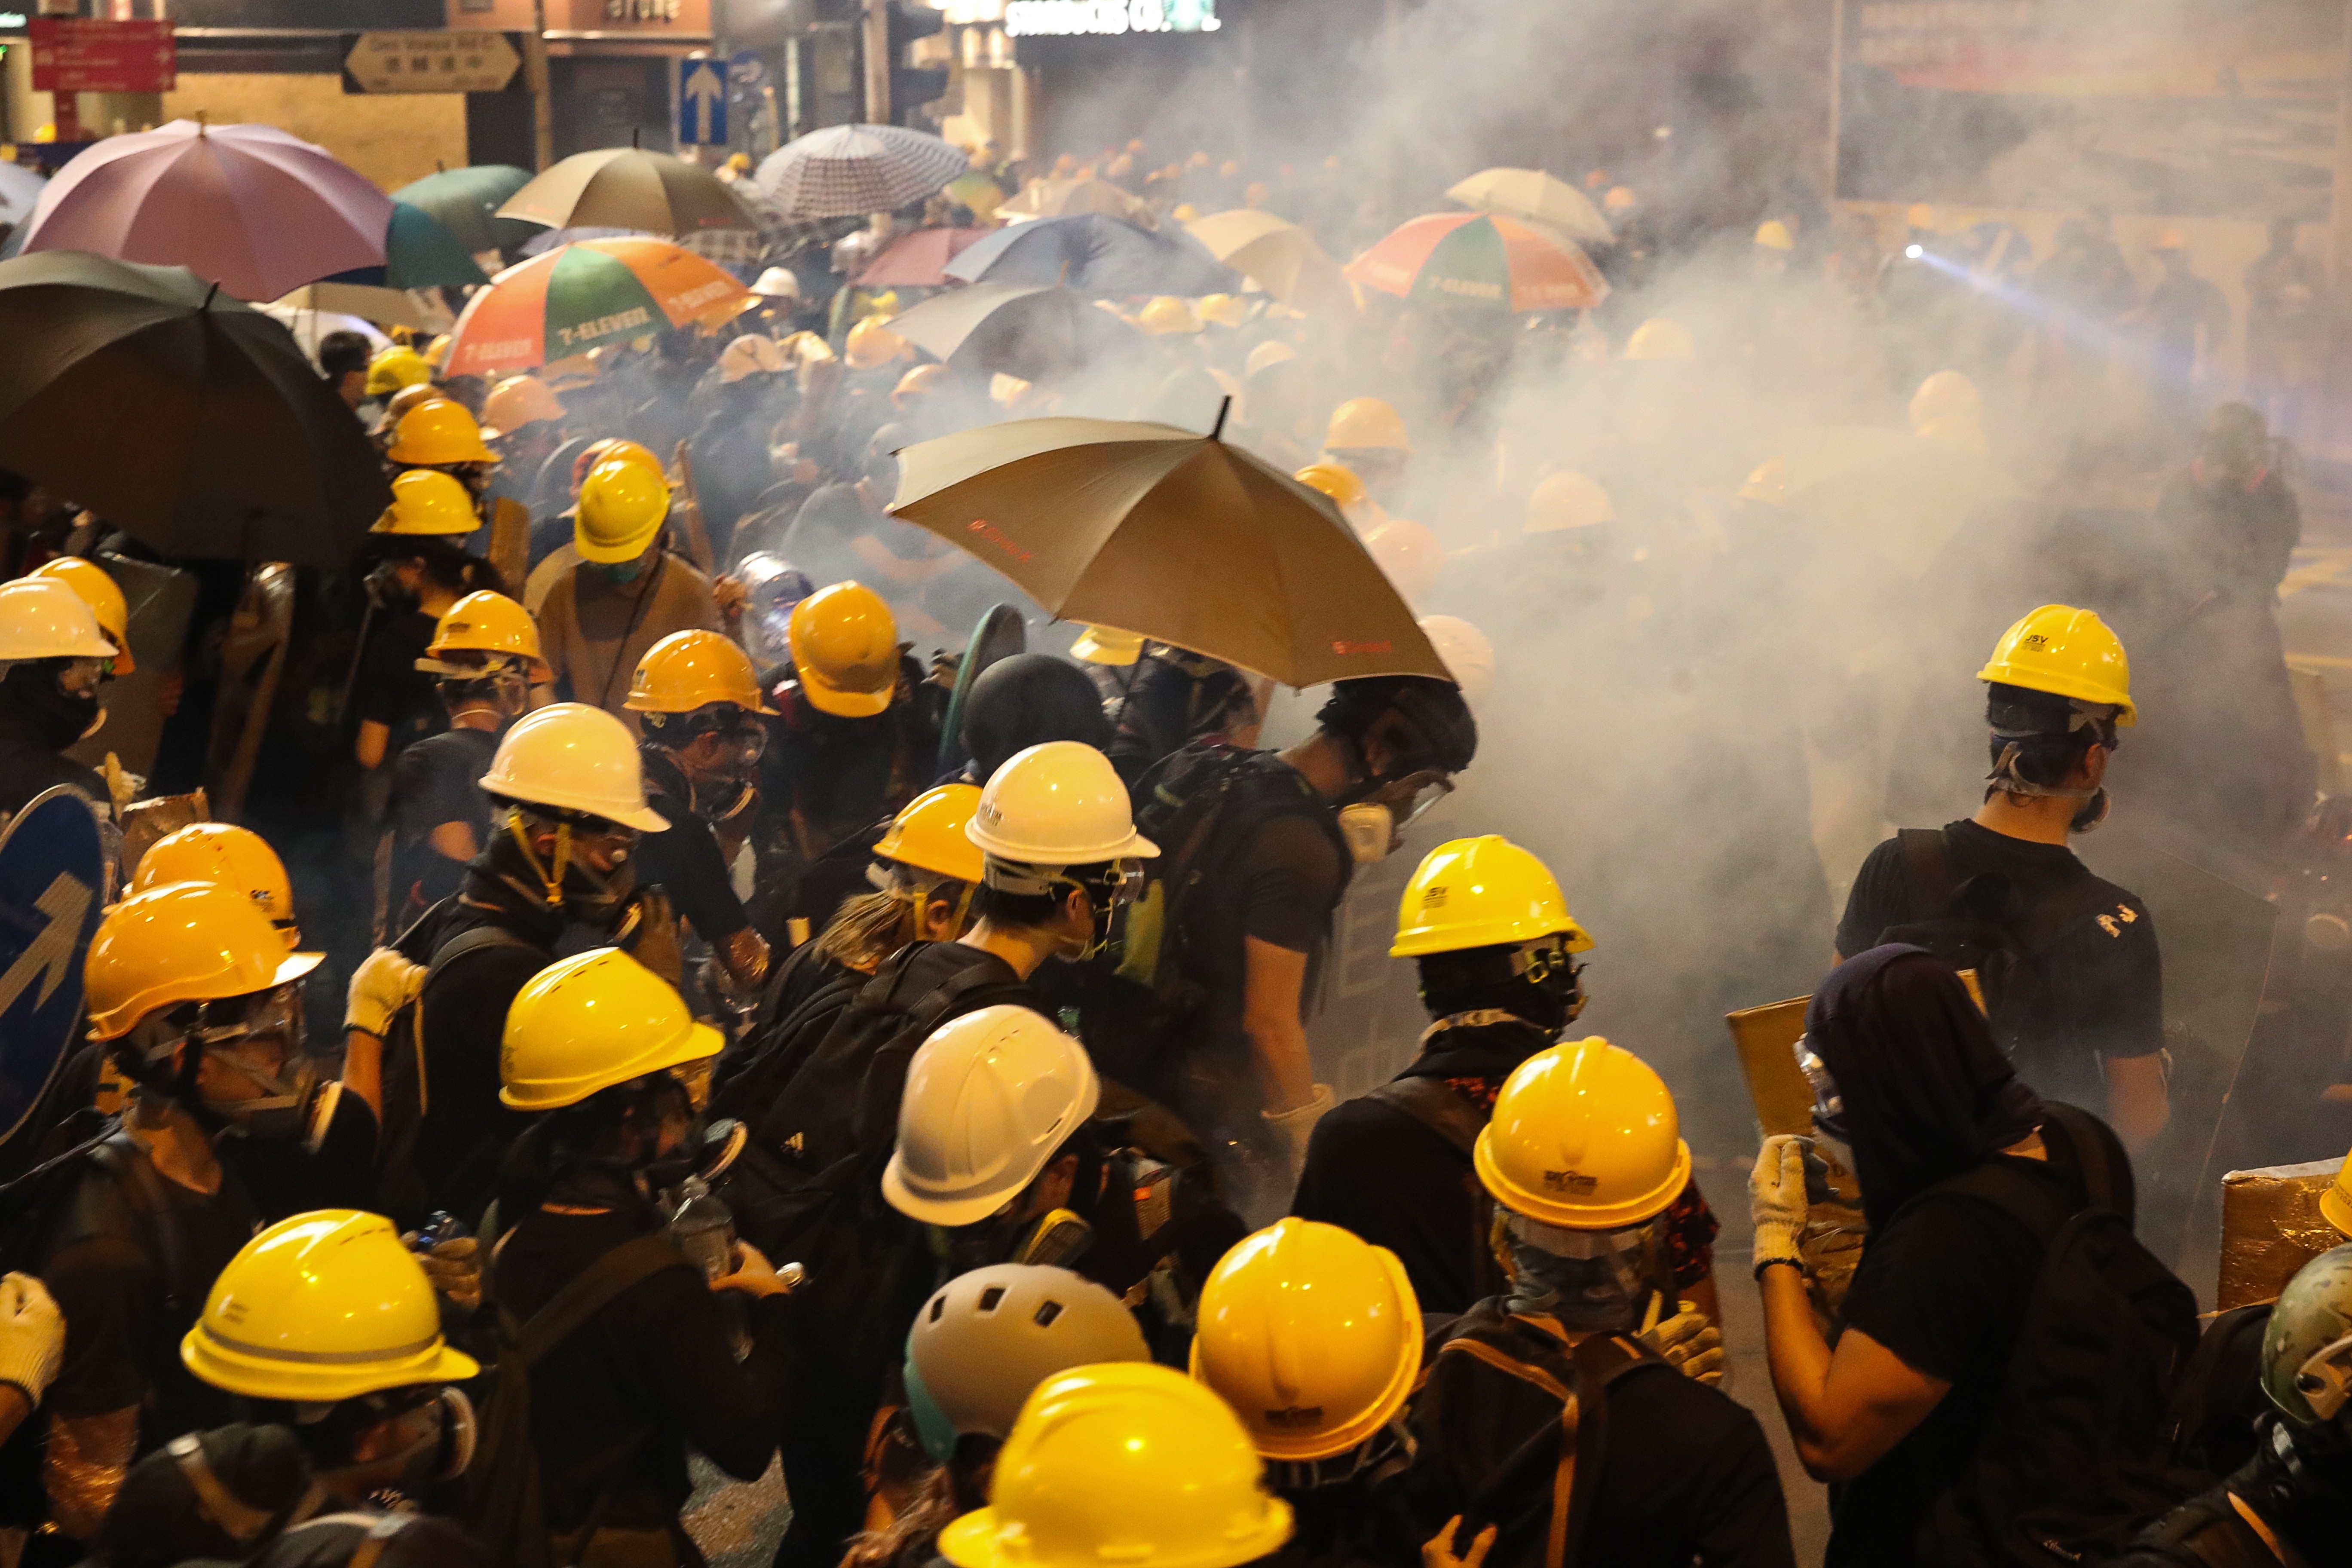 Protesters have repeatedly taken to the streets to rail against the now-shelved extradition bill. Photo: EPA